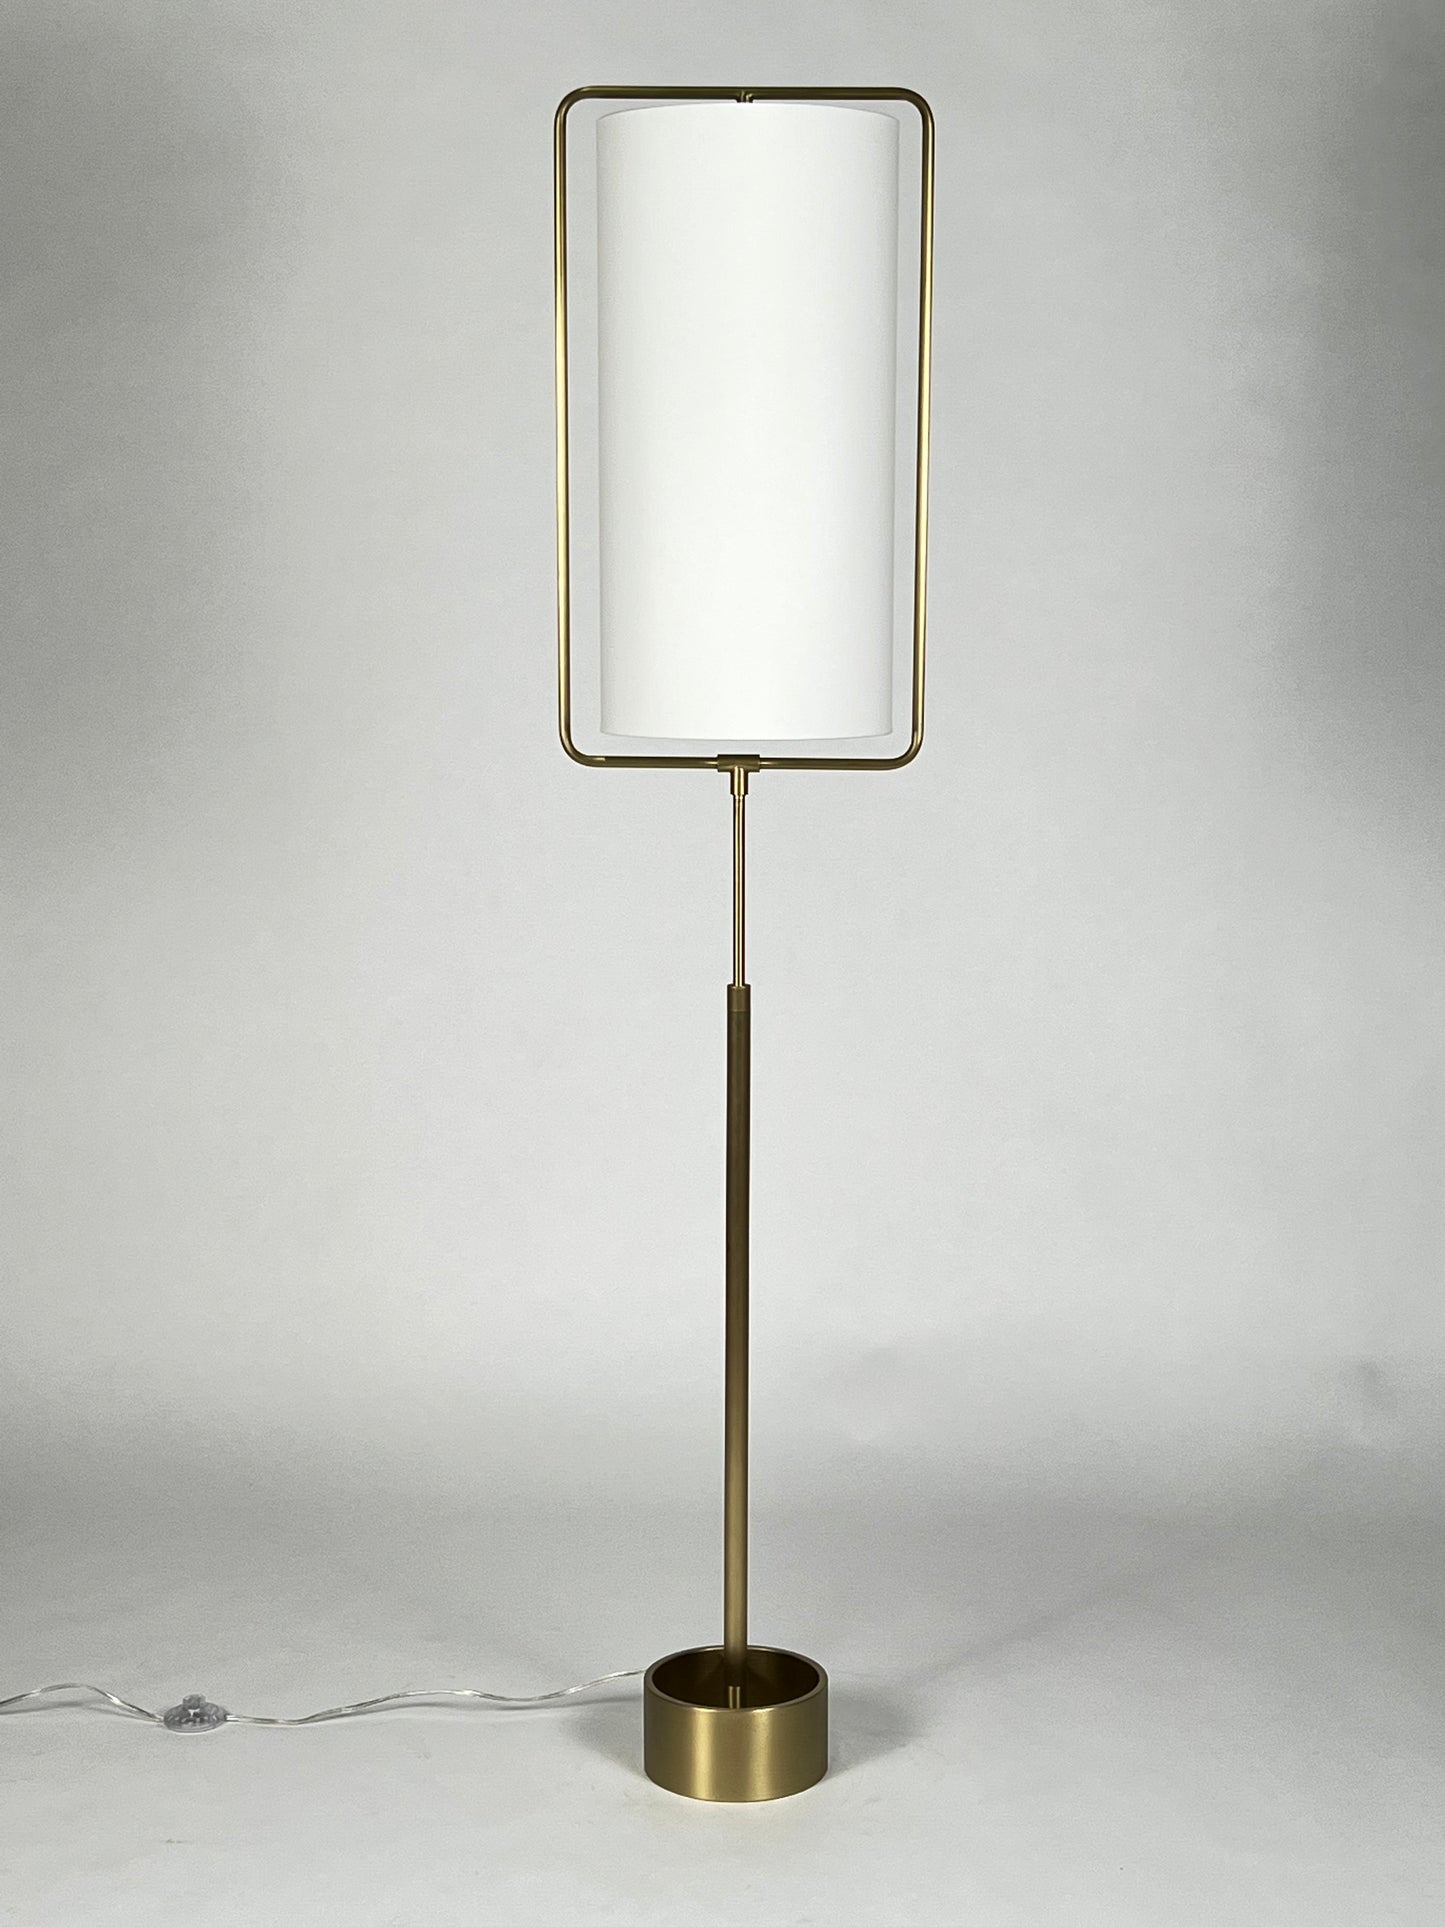 Brass floor lamp with tall round white shade